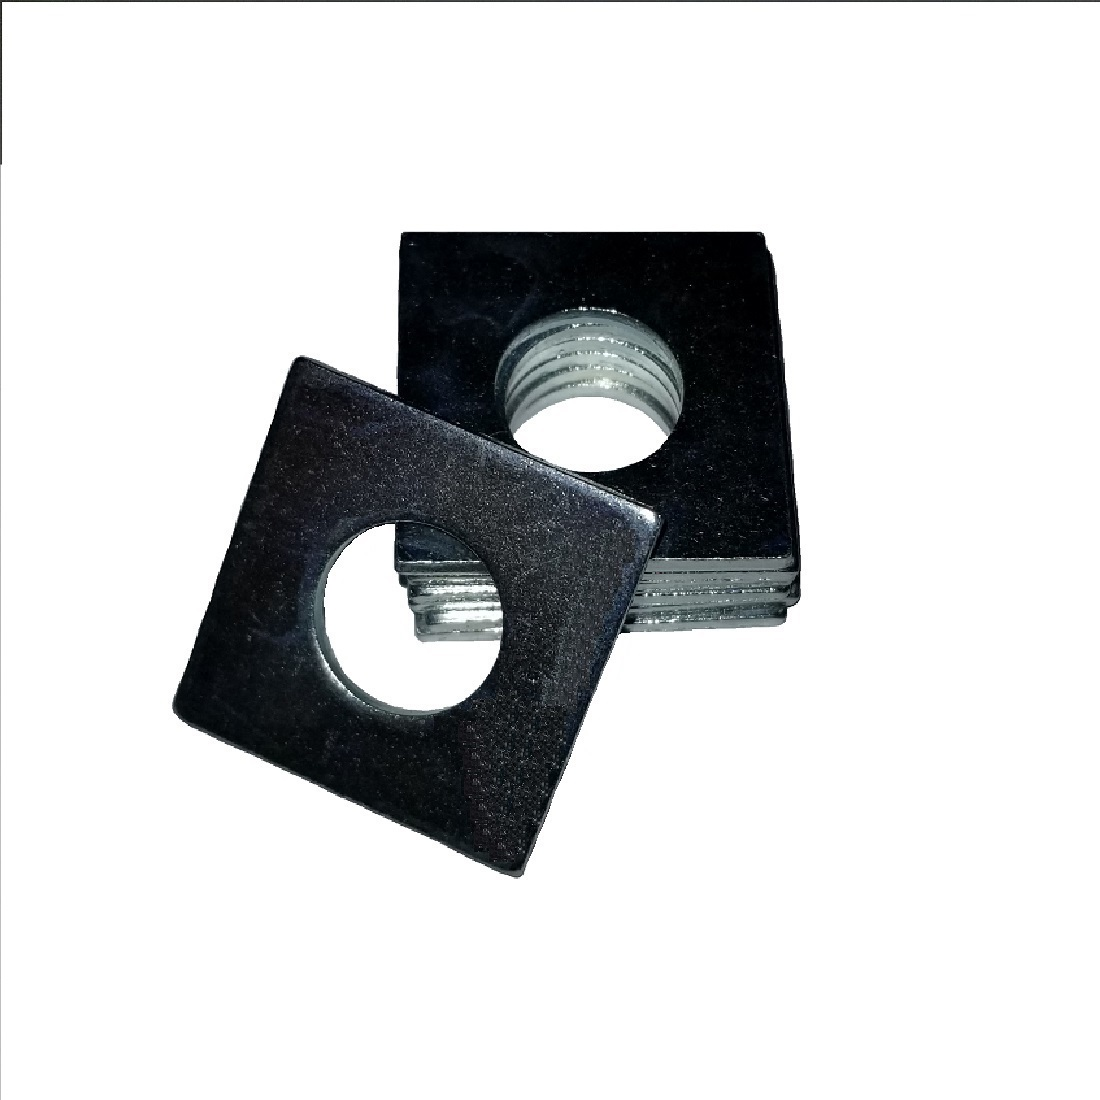 Square OD Washer - 0.247 ID, 0.670 OD, 0.075 Thick, Spring Steel - Hard, Zinc & Clear